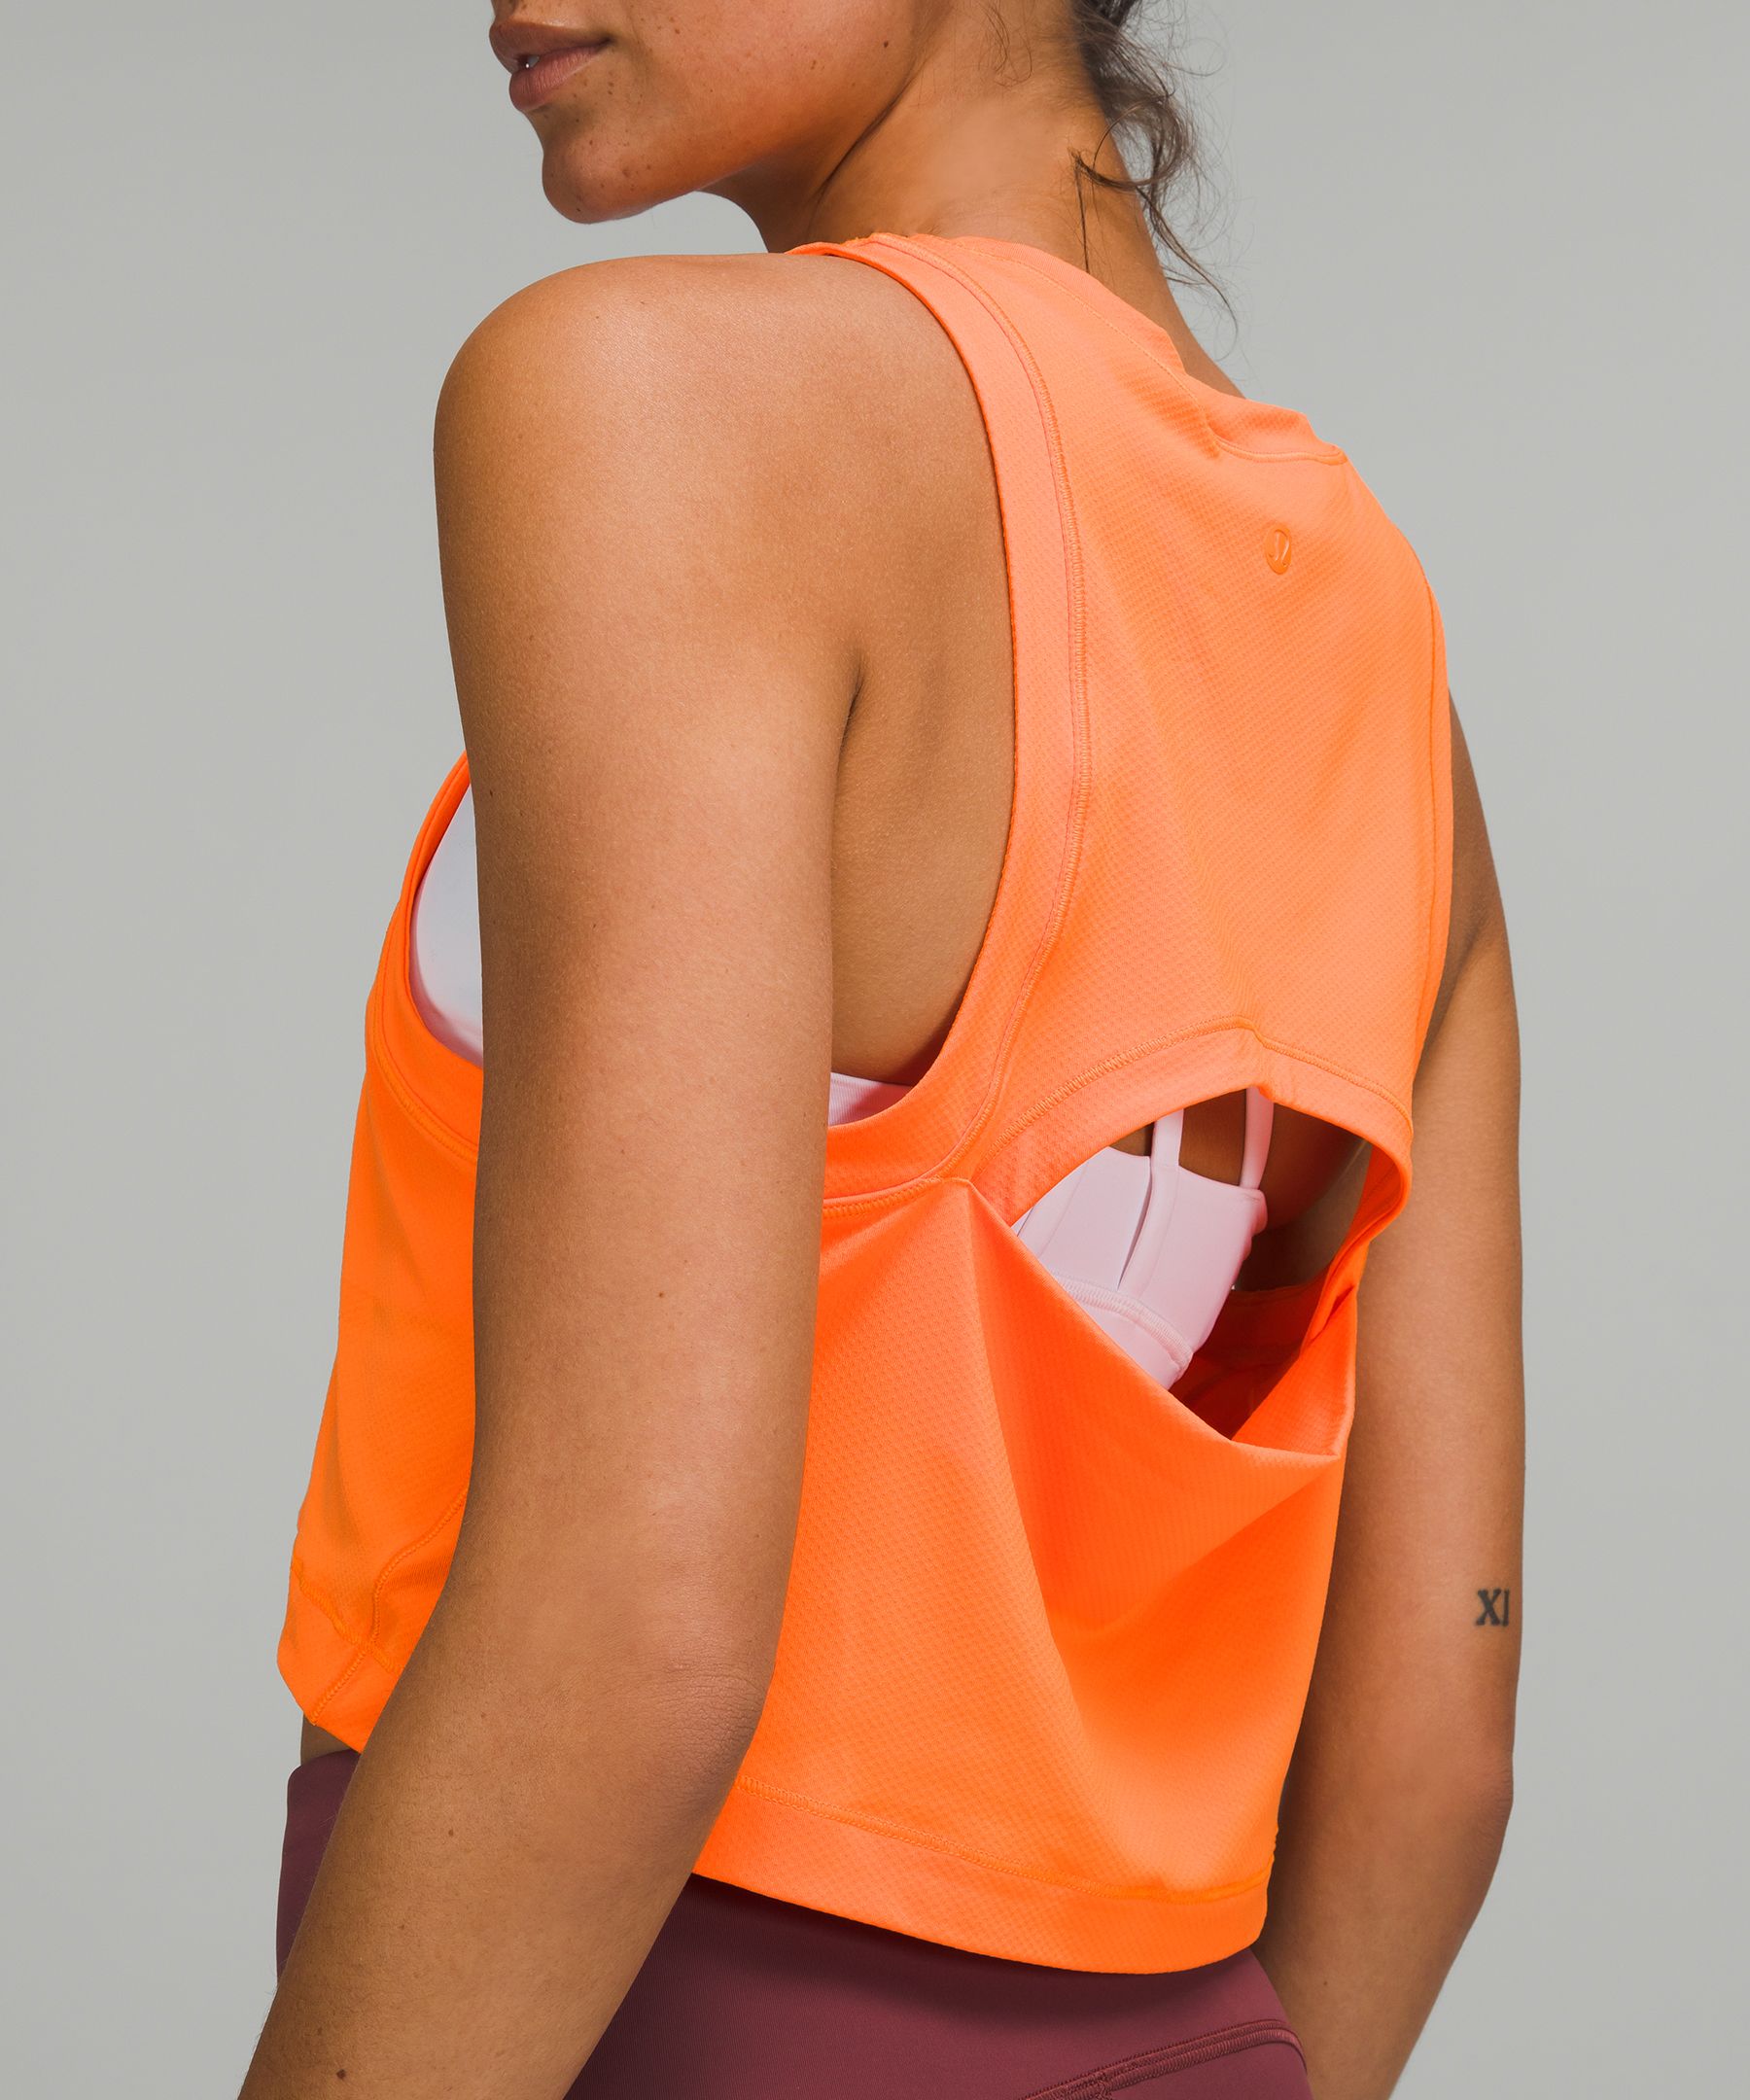 Open-Back Cropped Training Tank Top